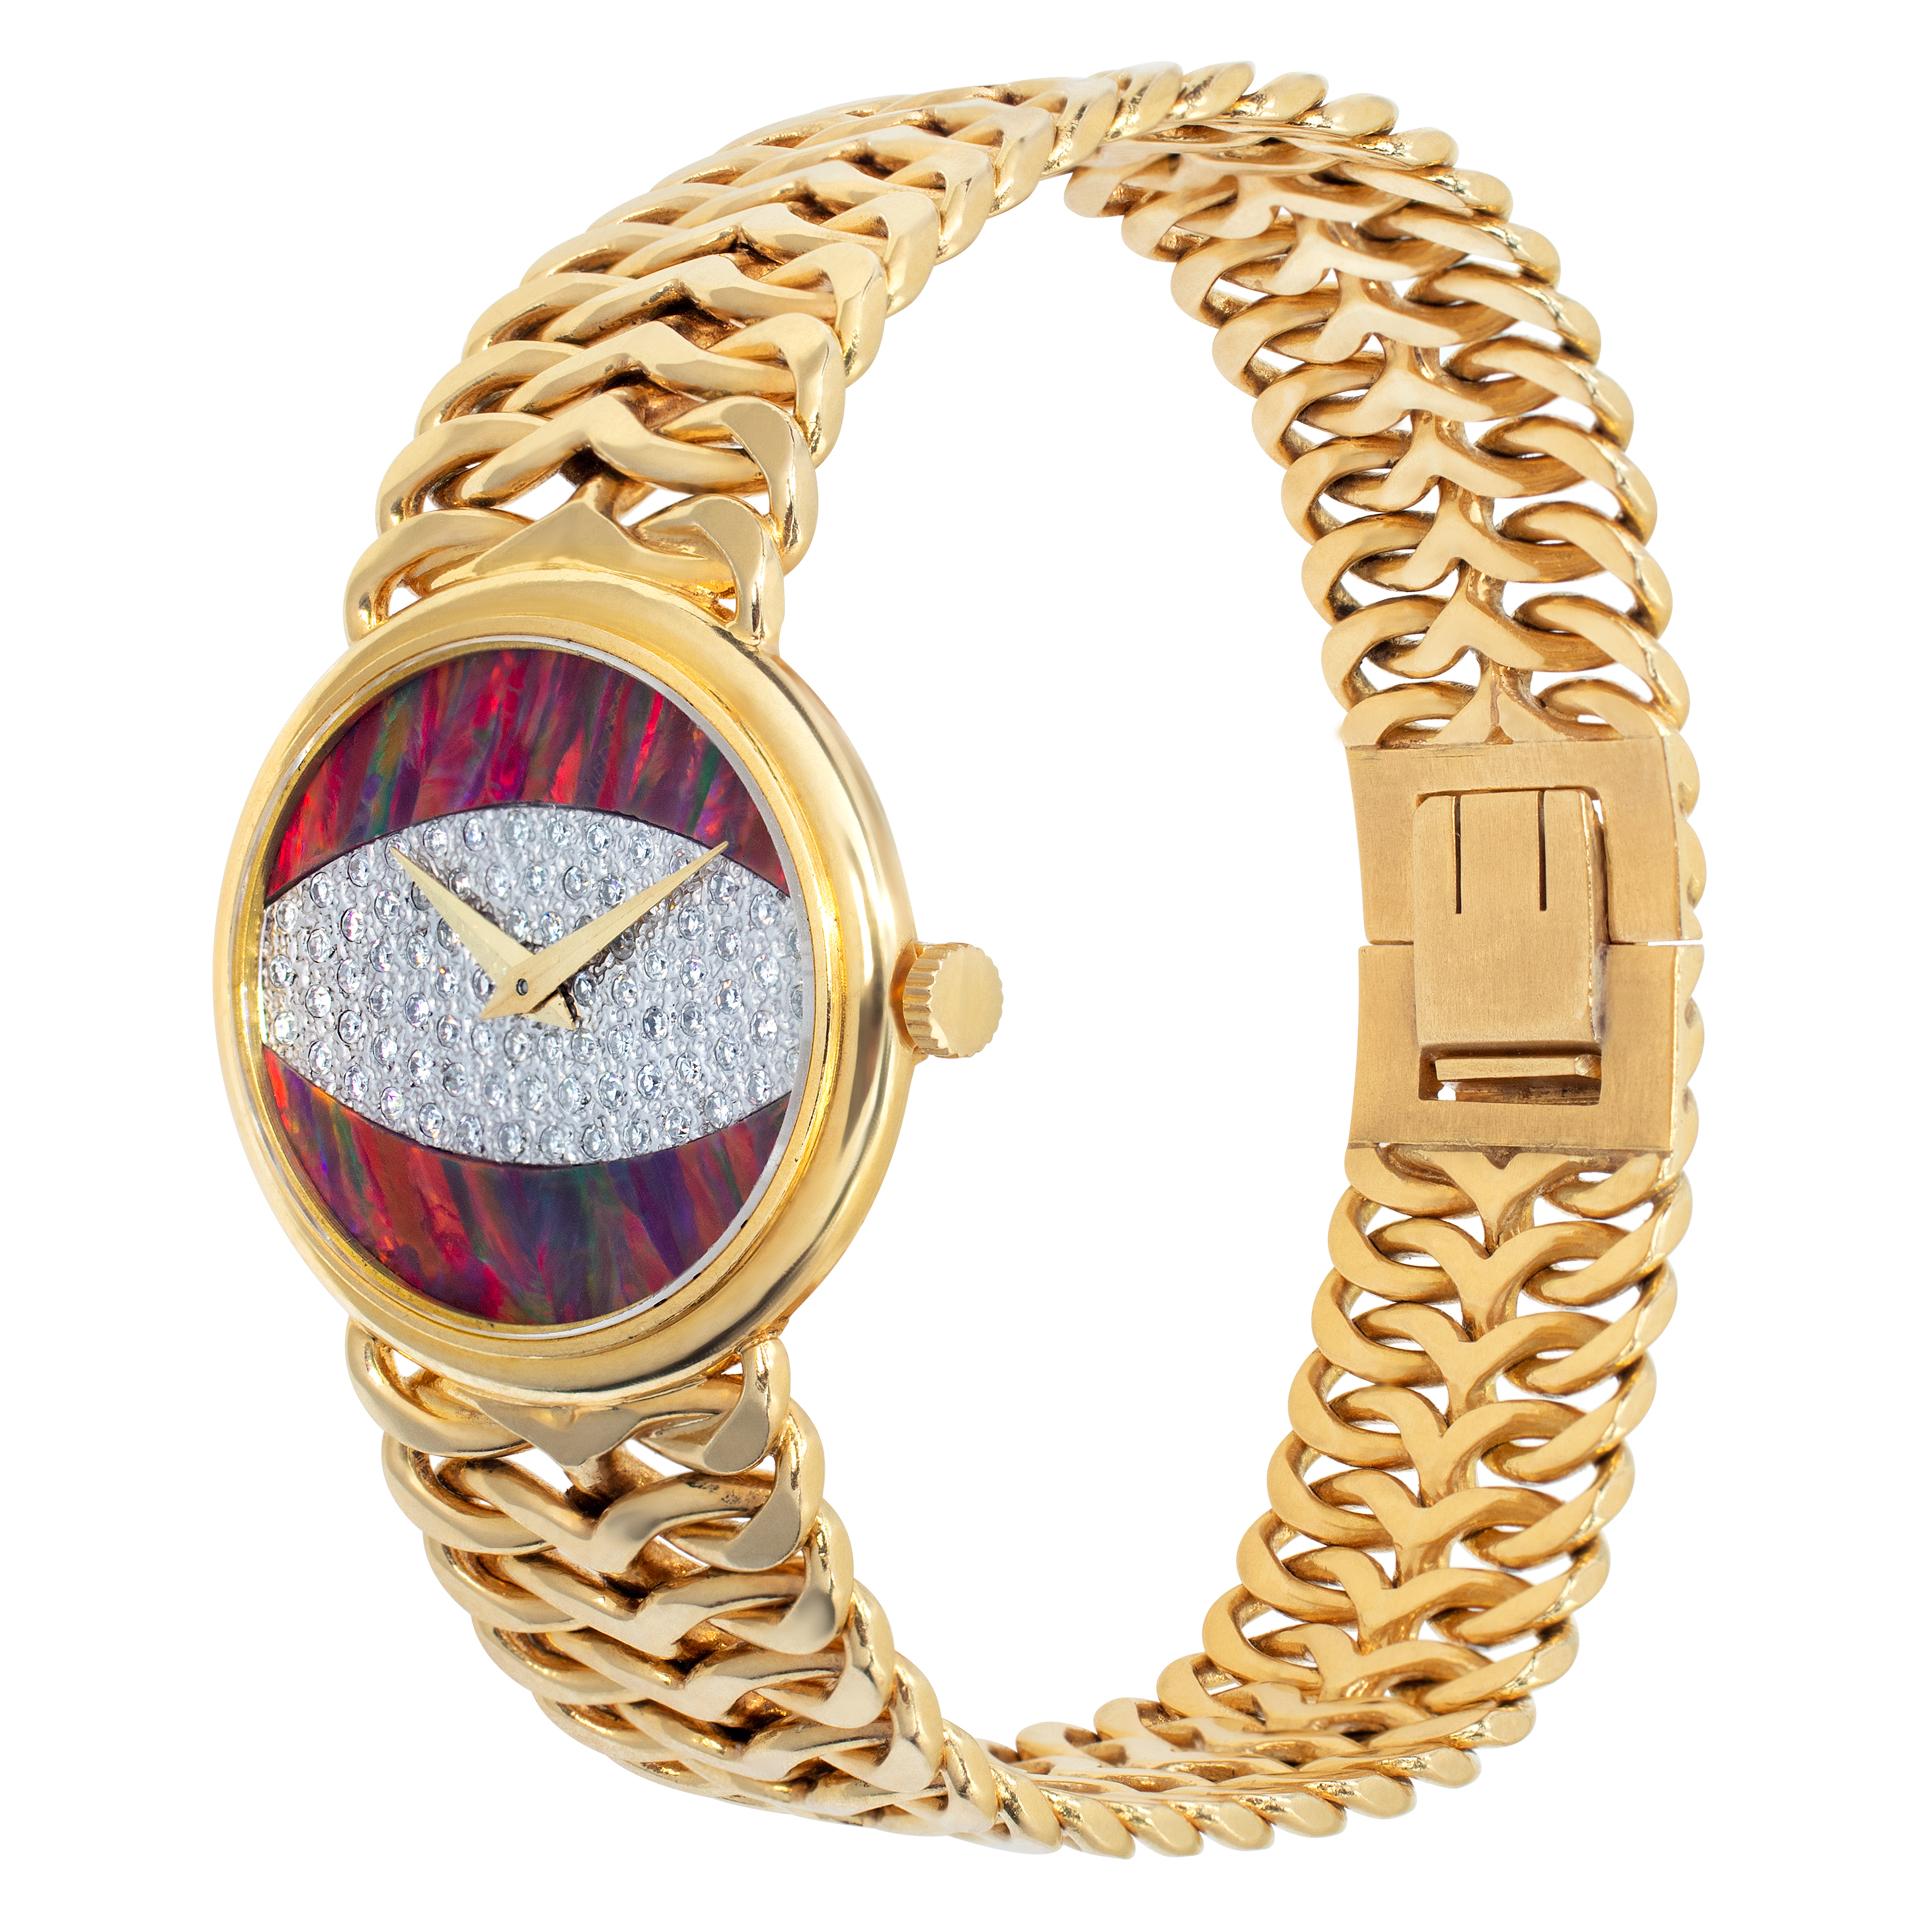 Piaget watch in 18k yellow gold with opal and pave diamond dial. Manual. 27 mm case size. 6 inch length. Ref 9802n90. Fine Pre-owned Piaget Watch. Certified preowned Classic Piaget Classic 9802n90 watch is made out of yellow gold on a 18k bracelet